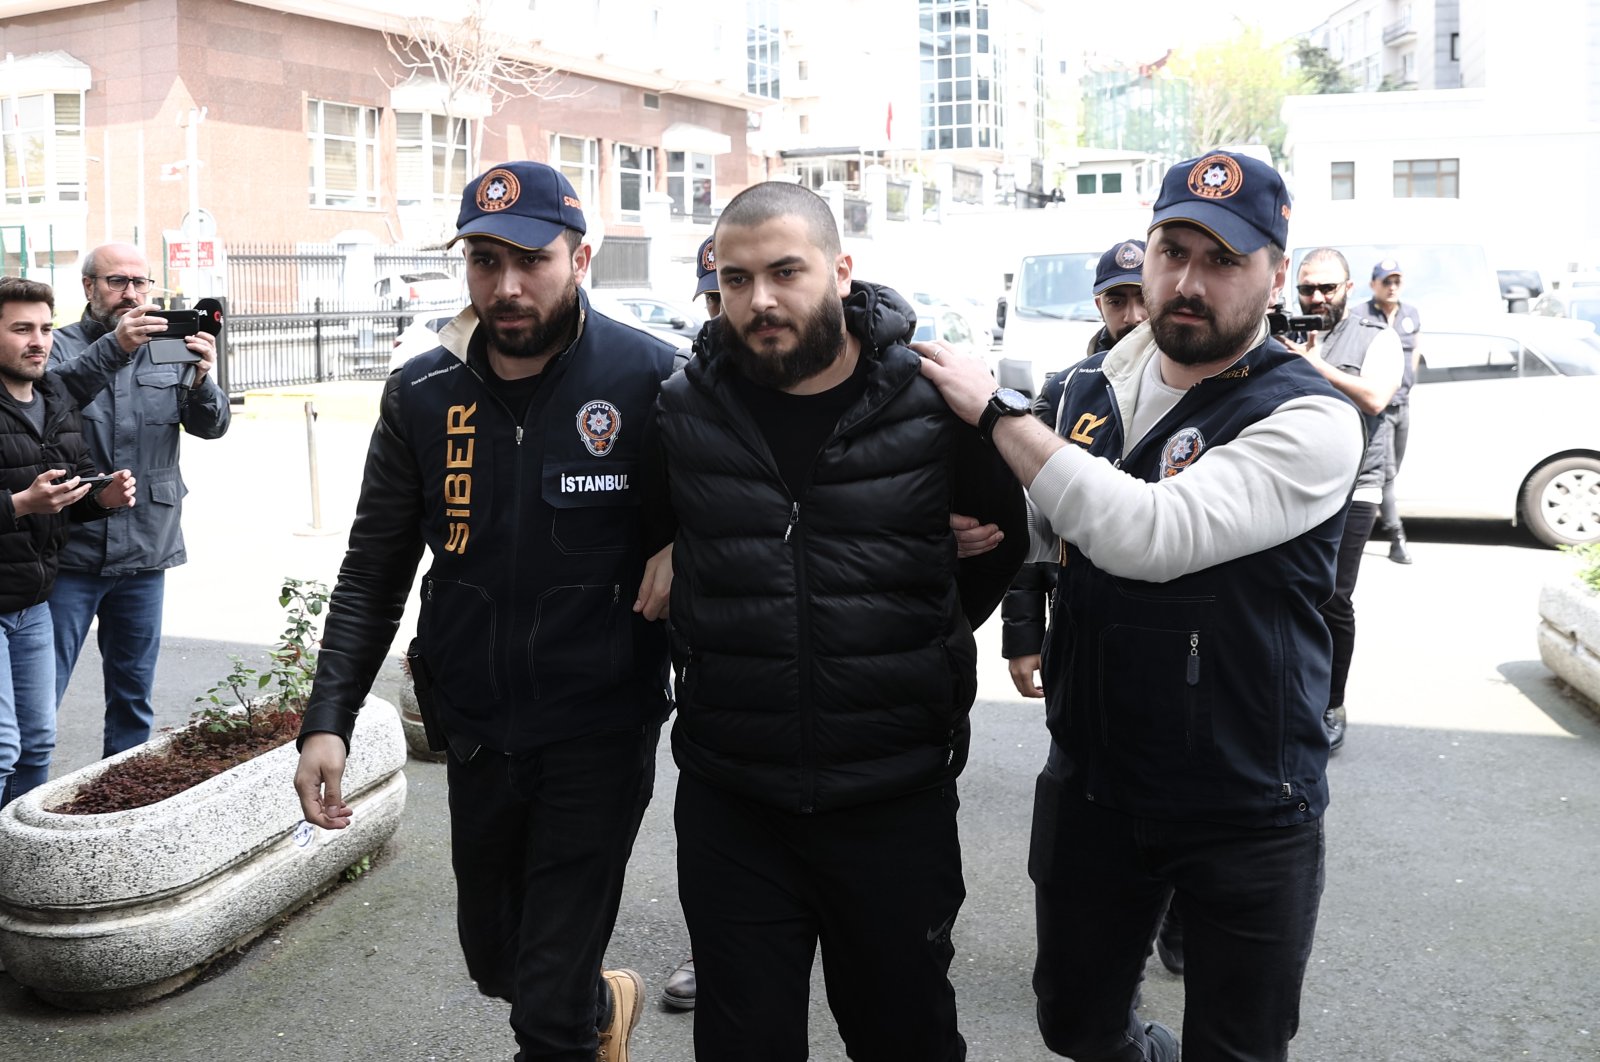 Faruk Fatih Özer, the founder and CEO of the collapsed crypto exchange Thodex, is being brought to Istanbul Police Department, in Istanbul, Türkiye, April 20, 2023. (AA Photo)